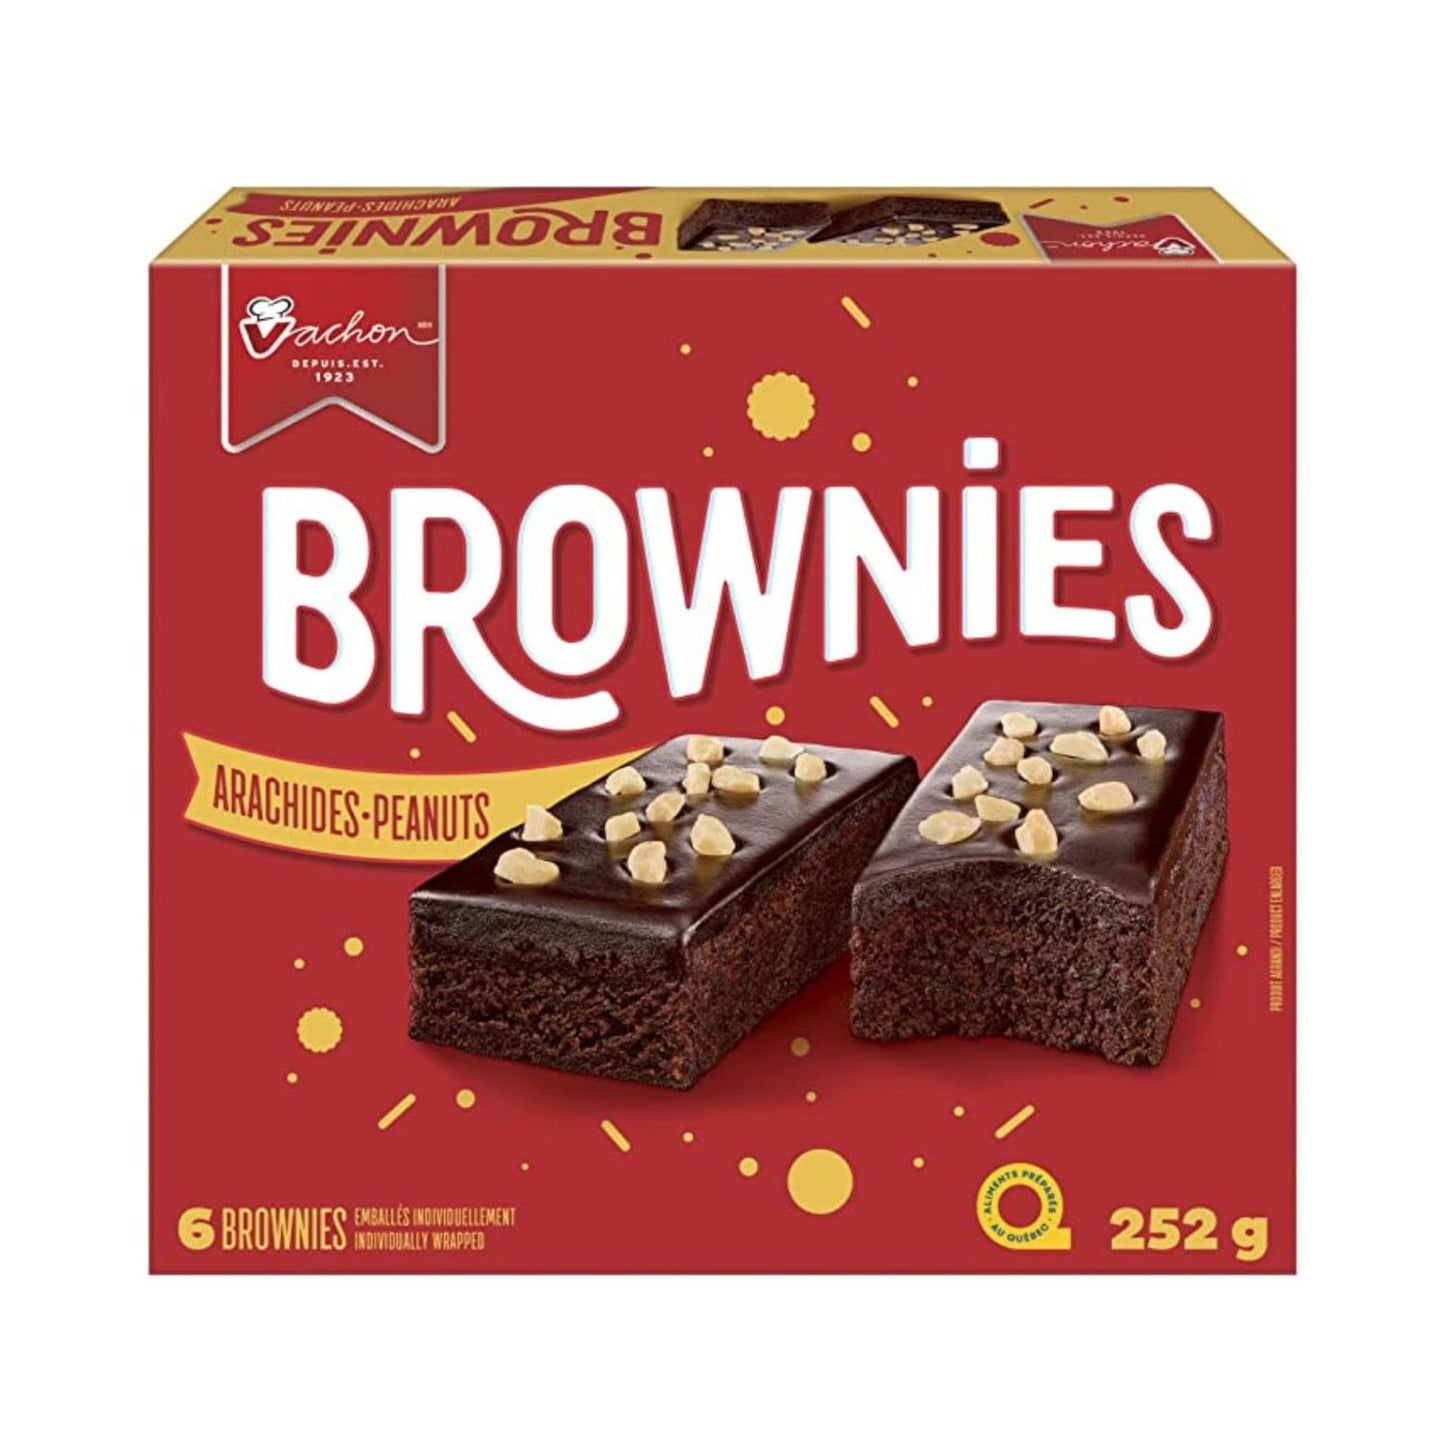 Vachon Brownies with Peanuts, Contains 6 Individually Wrapped Brownie Snacks, 252g/8.9oz (Shipped from Canada)